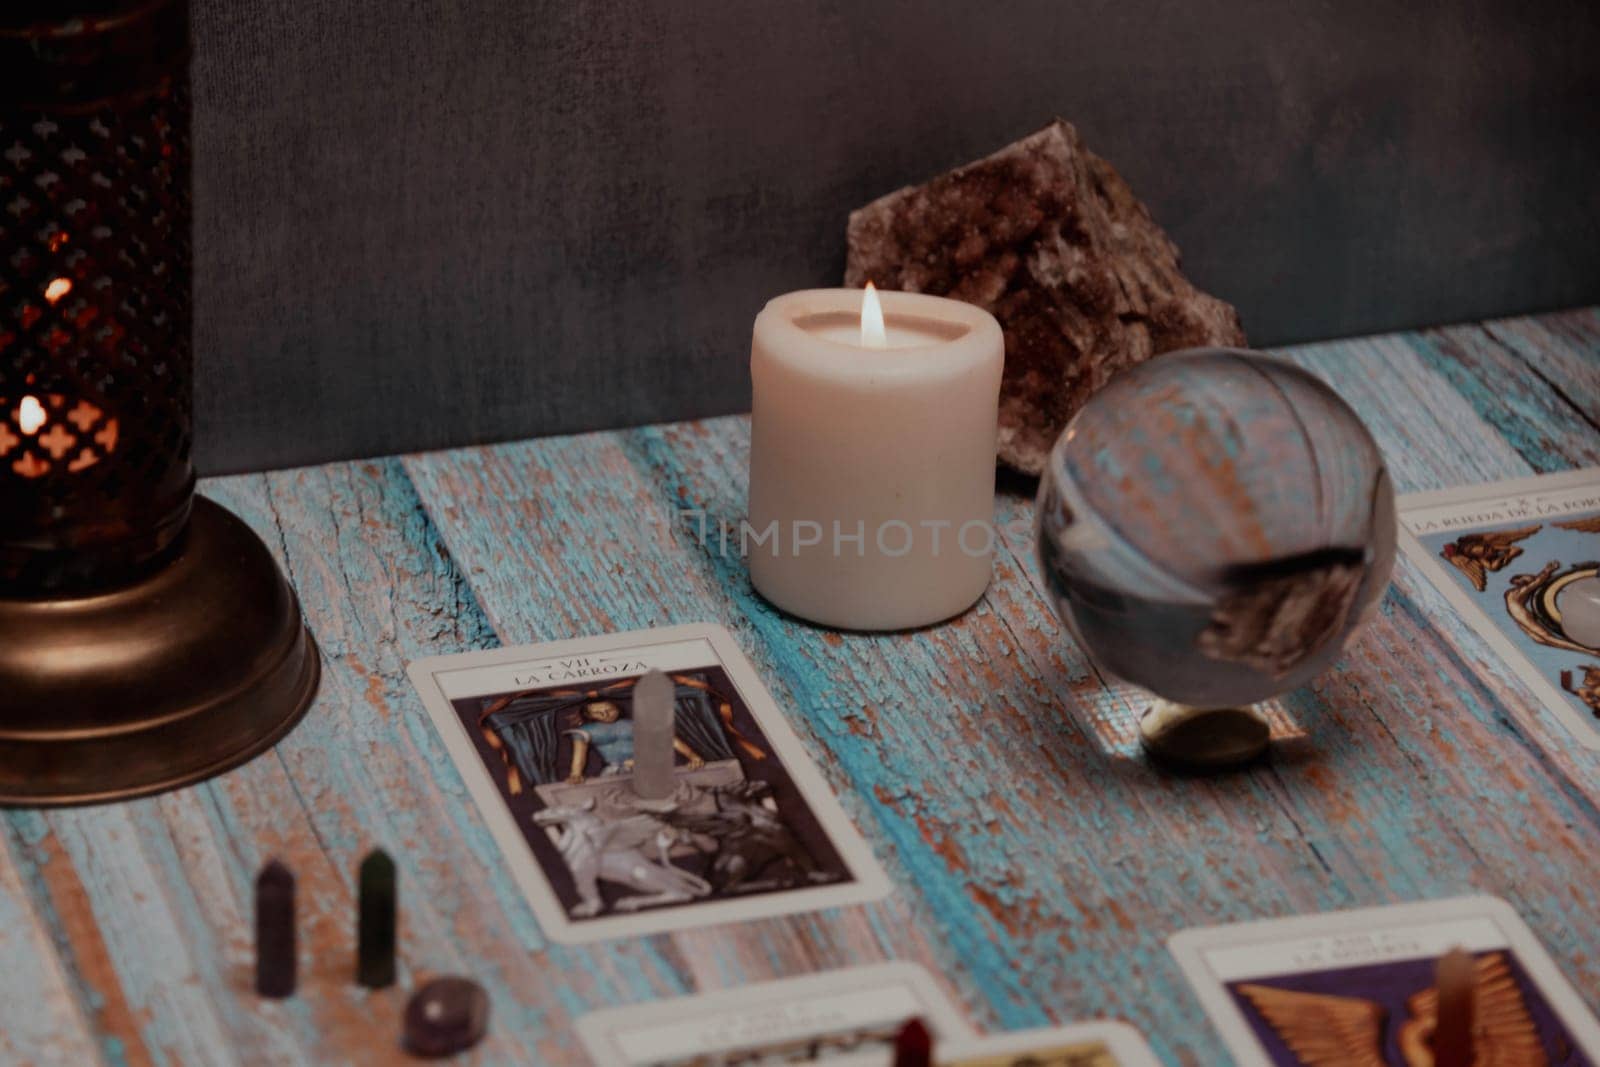 A tarot card reading session depicted with candles, crystals, and mystical accessories on a rustic wooden table. by jbruiz78